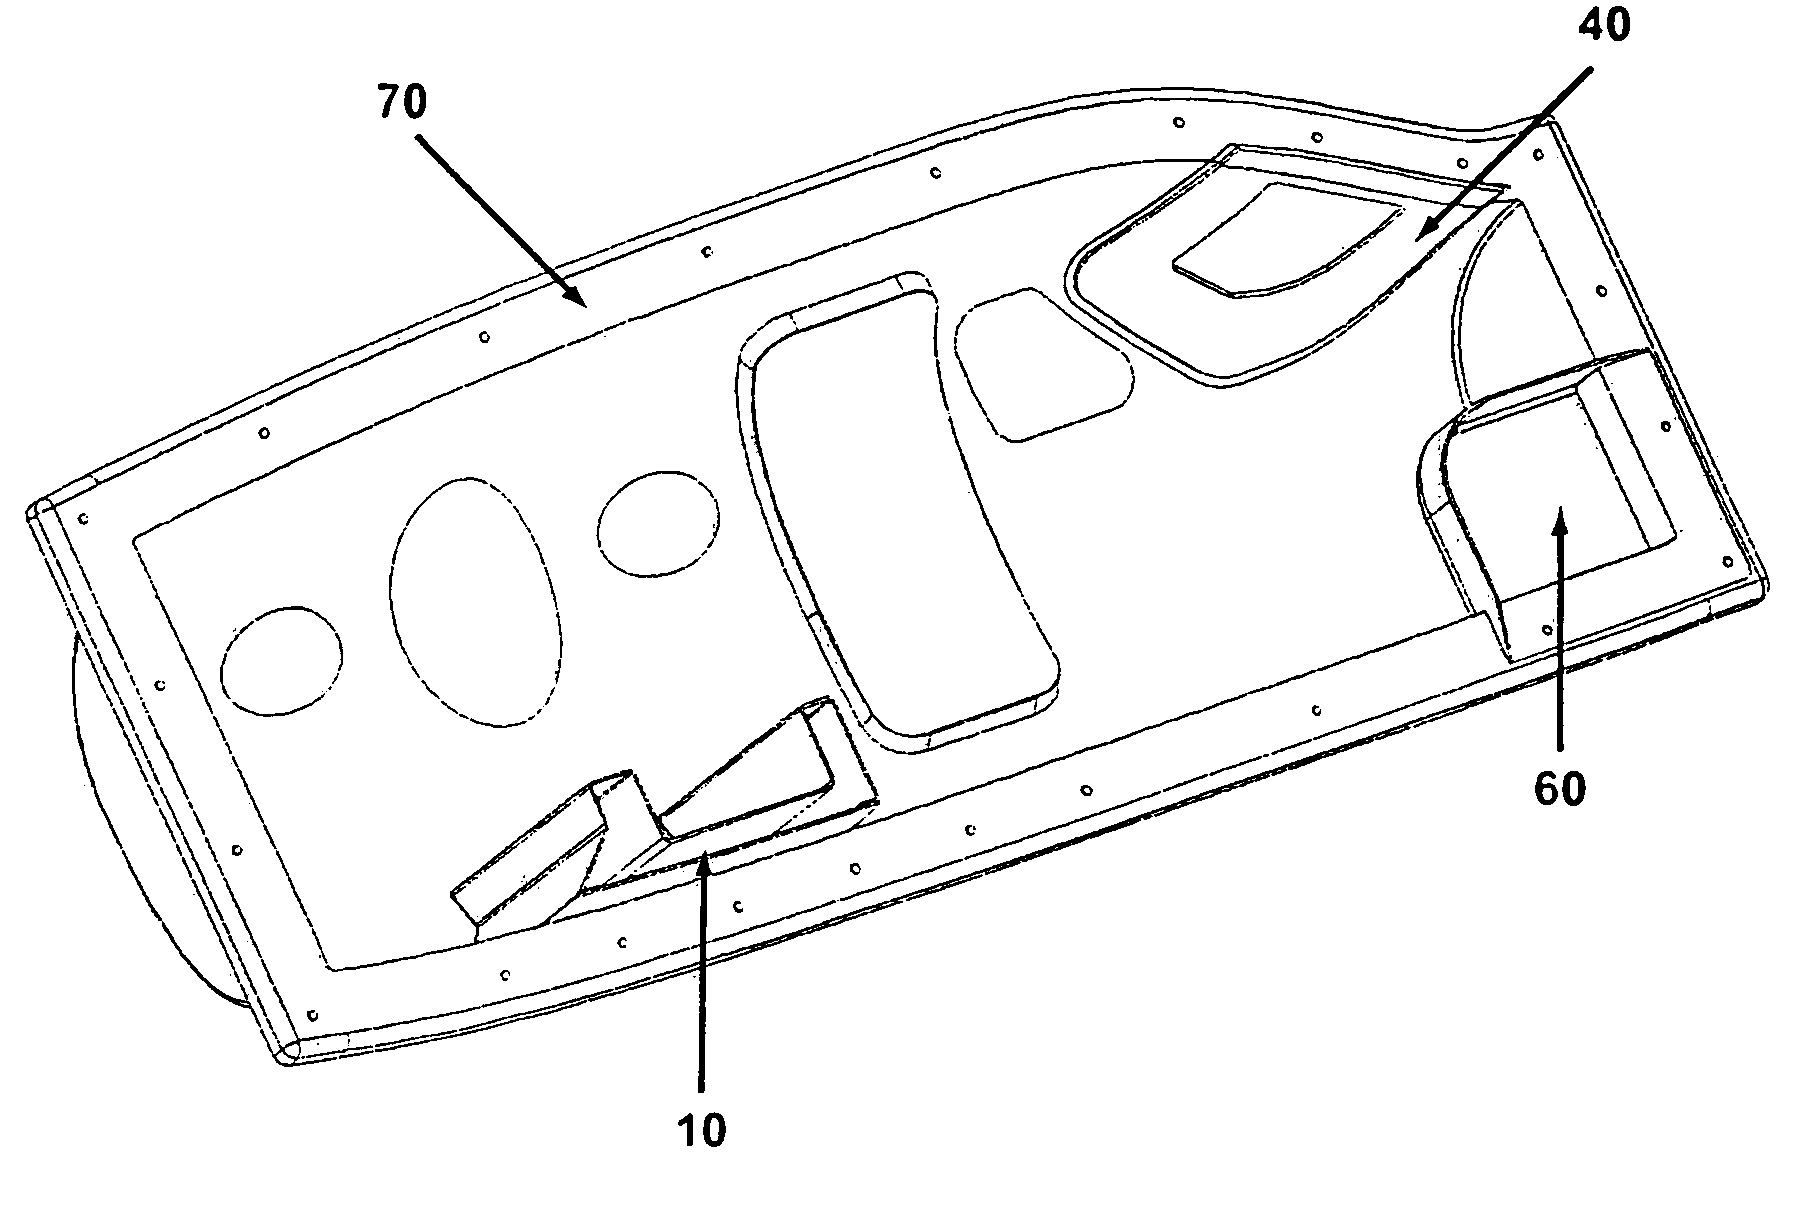 Methods for manufacturing composite aircraft, parts and a family of composite aircraft